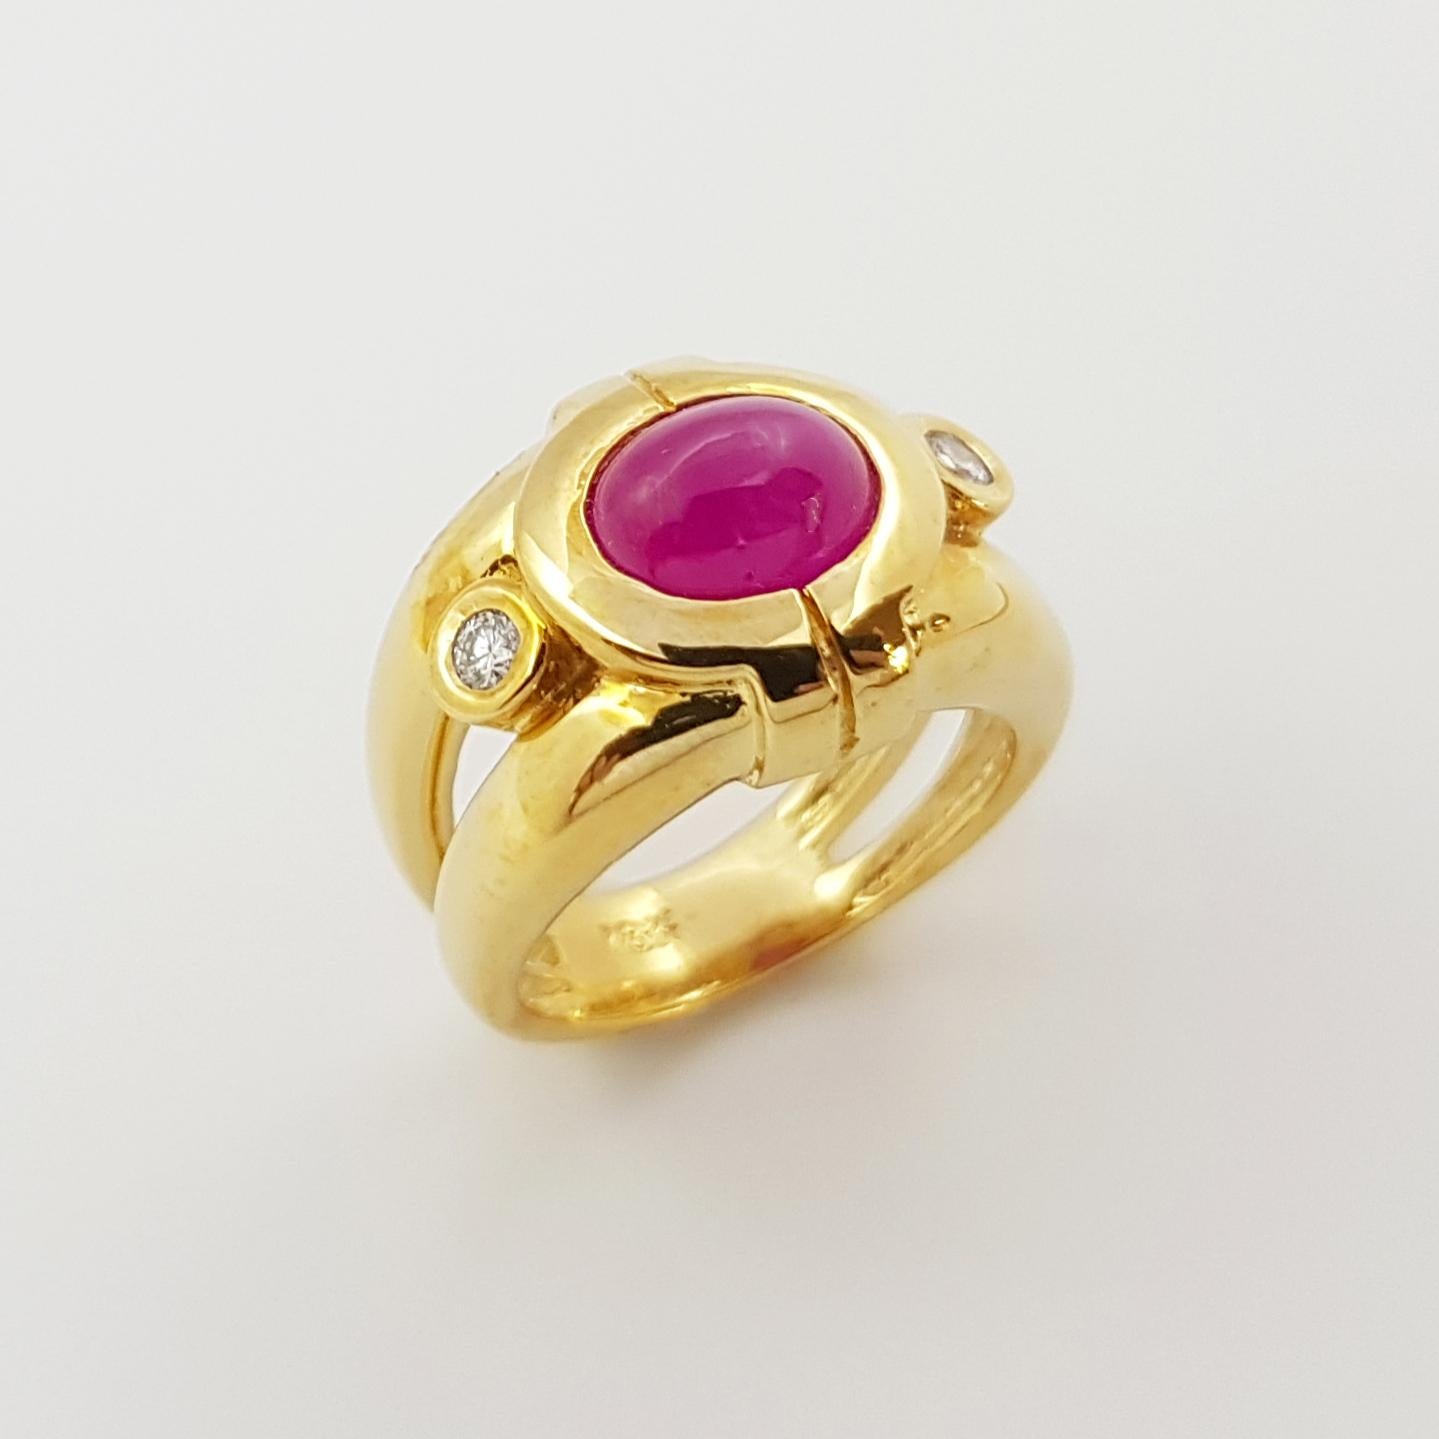 Cabochon Ruby with Diamond Ring set in 18 Karat Gold Settings For Sale 4